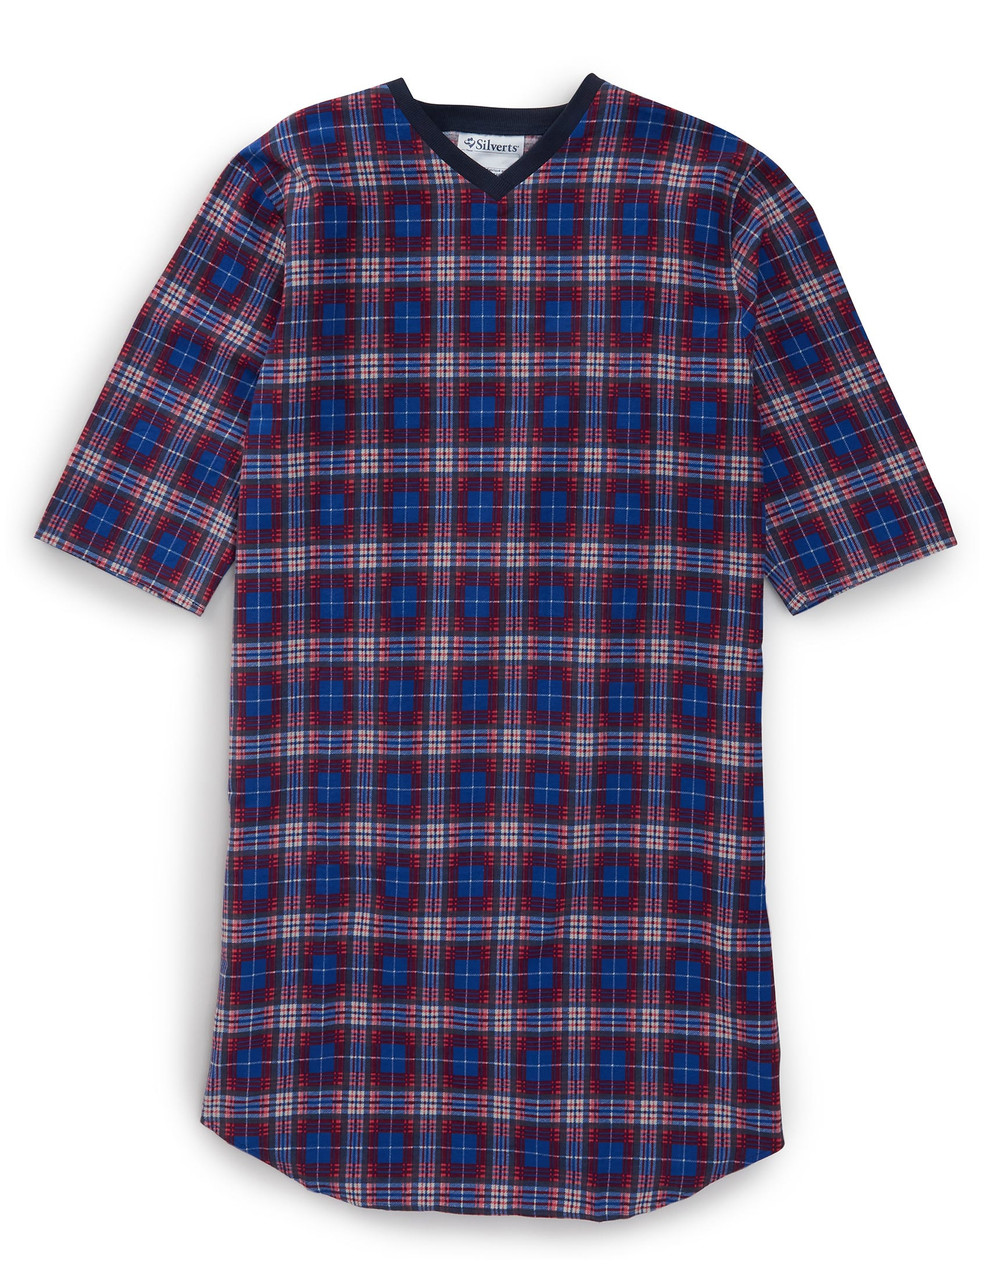 Silverts SV50120 Men's Flannel Hospital Gowns Red Plaid, Size=4XL, SV50120-SV610-4XL